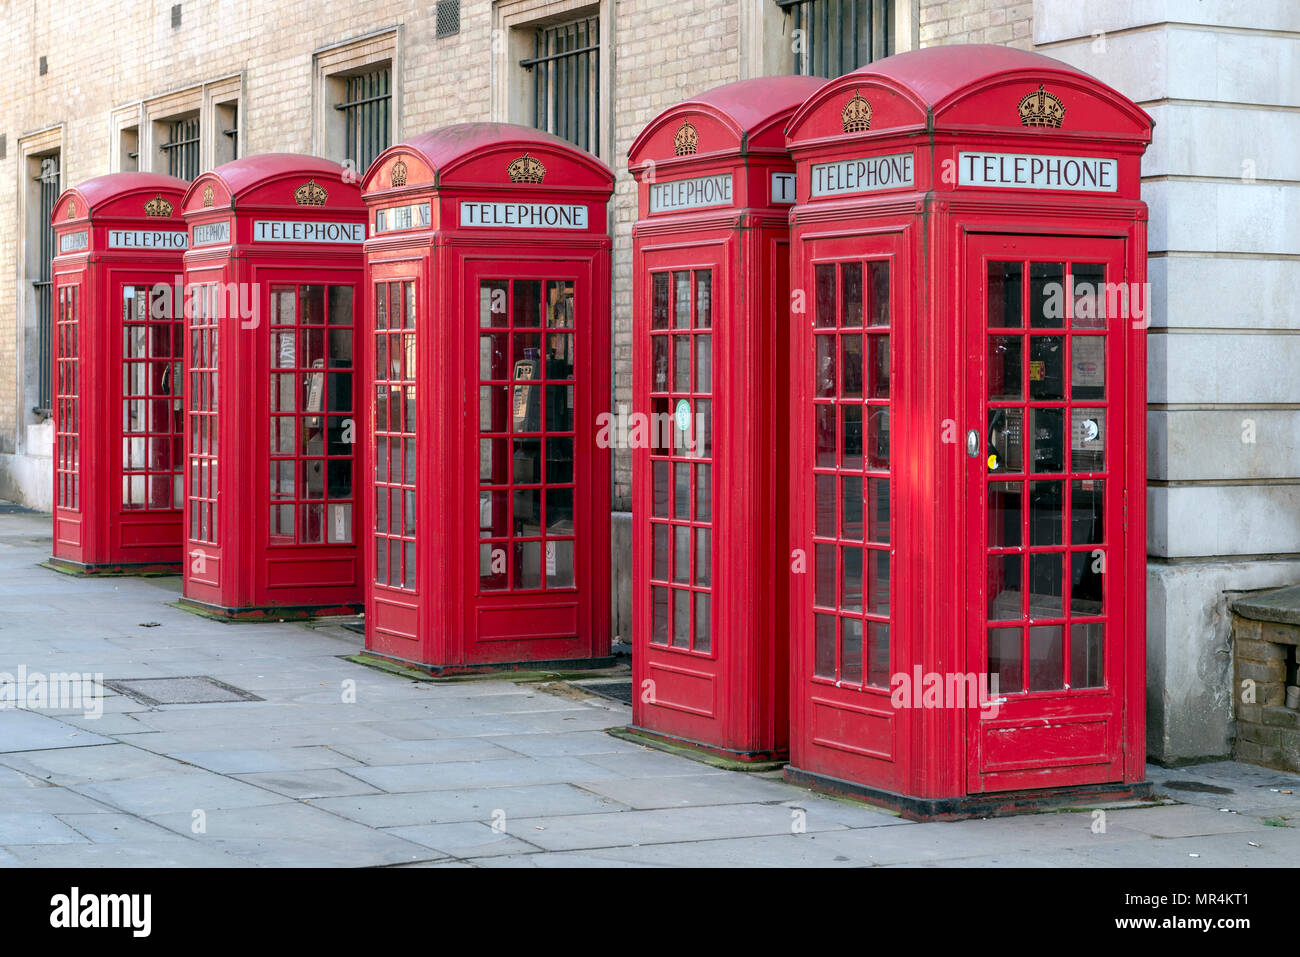 Four red telephone booths inline Stock Photo